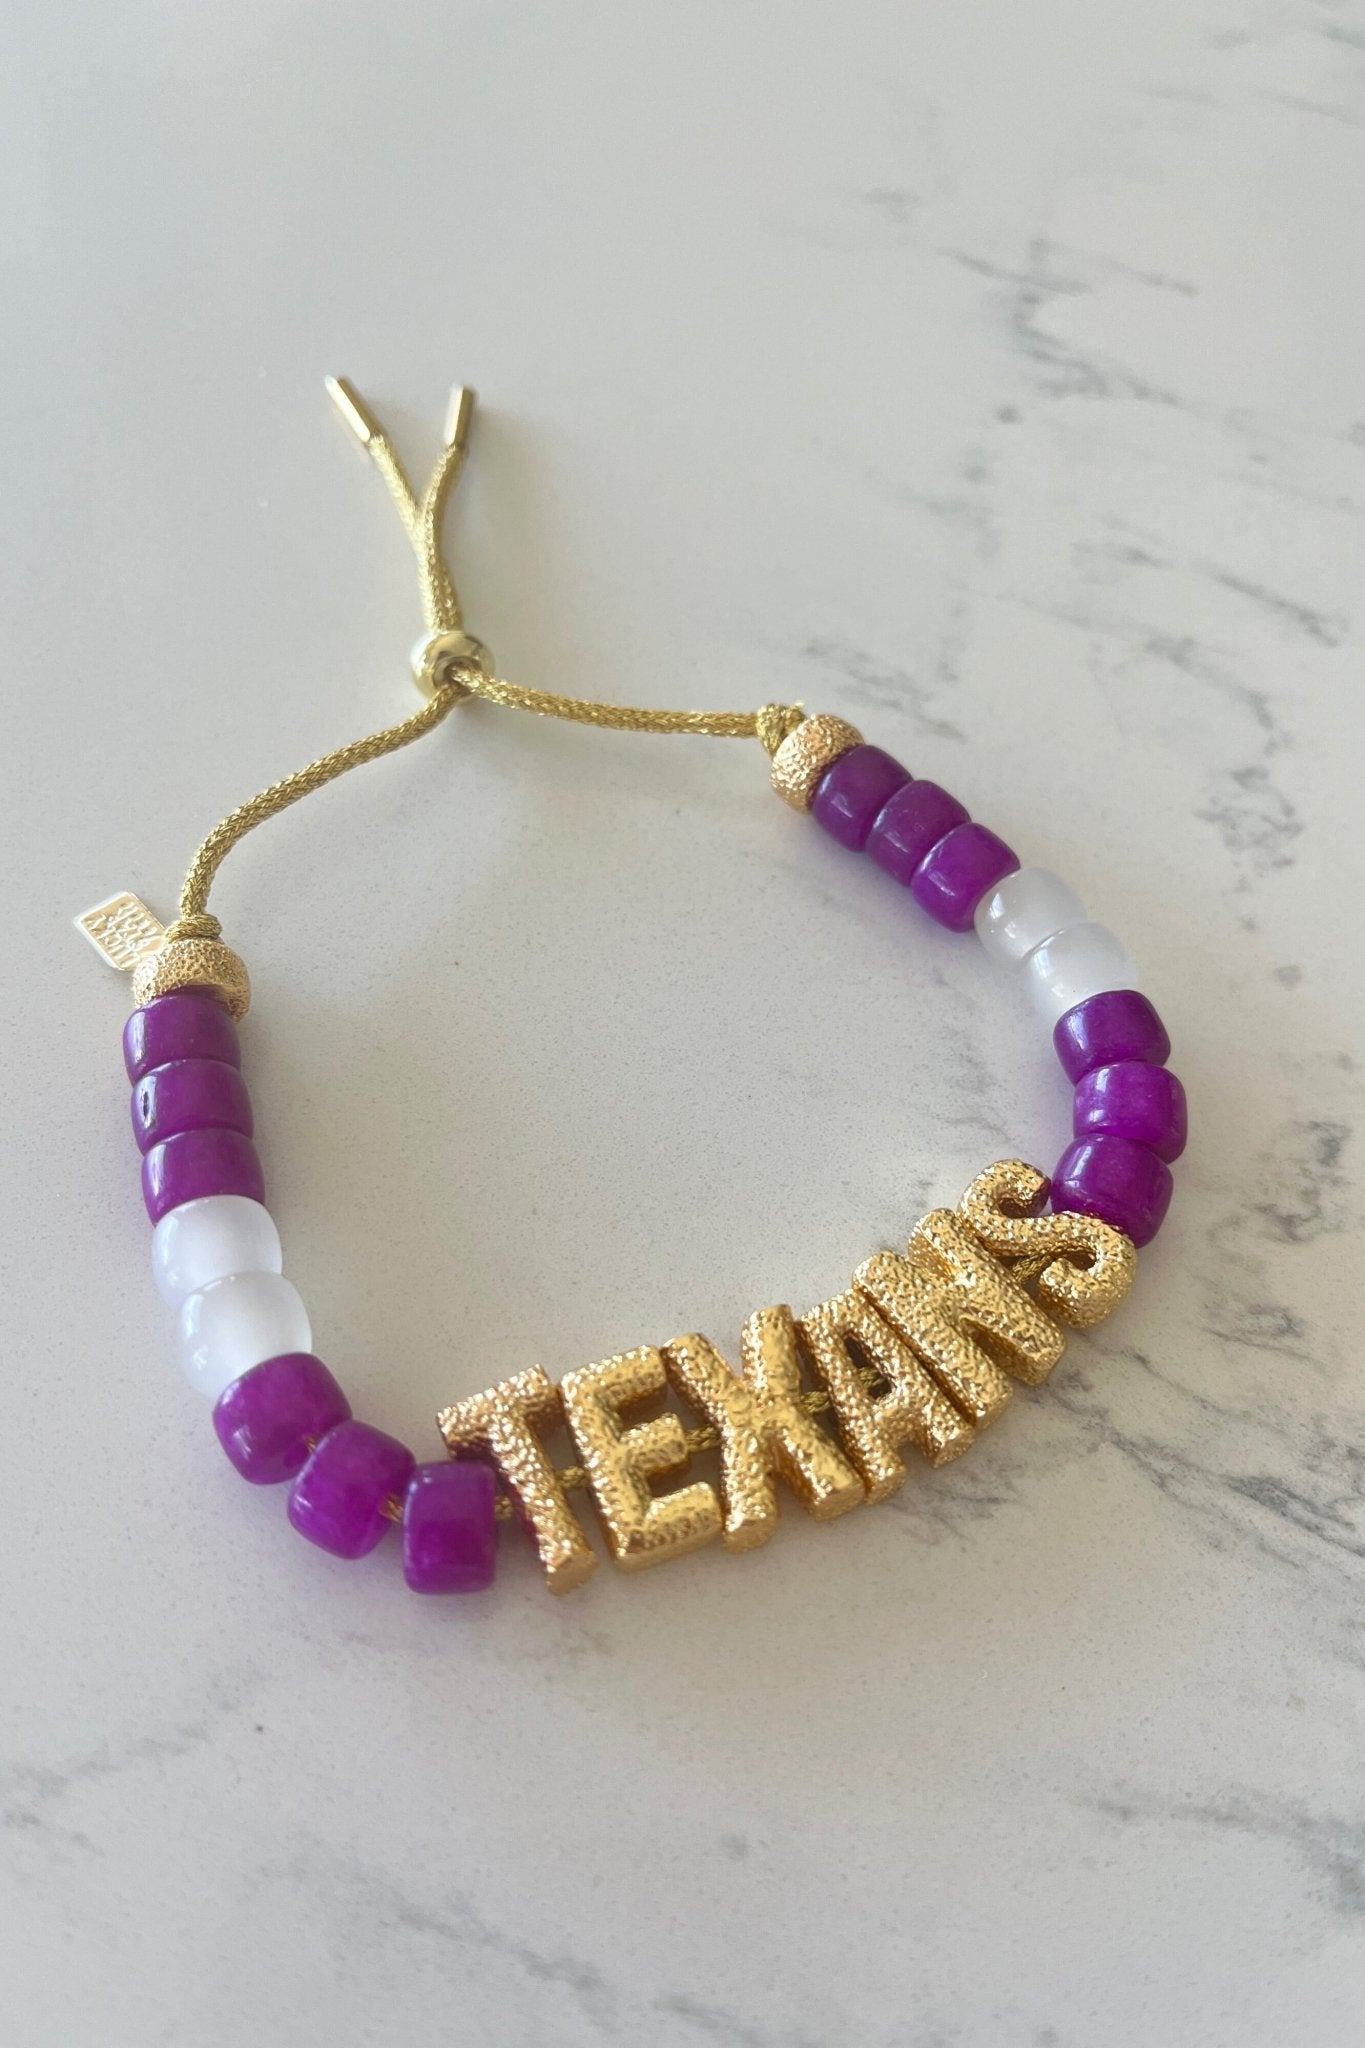 Texans Eye Candy ID Bracelet - Lucky Star Jewels - Color Game